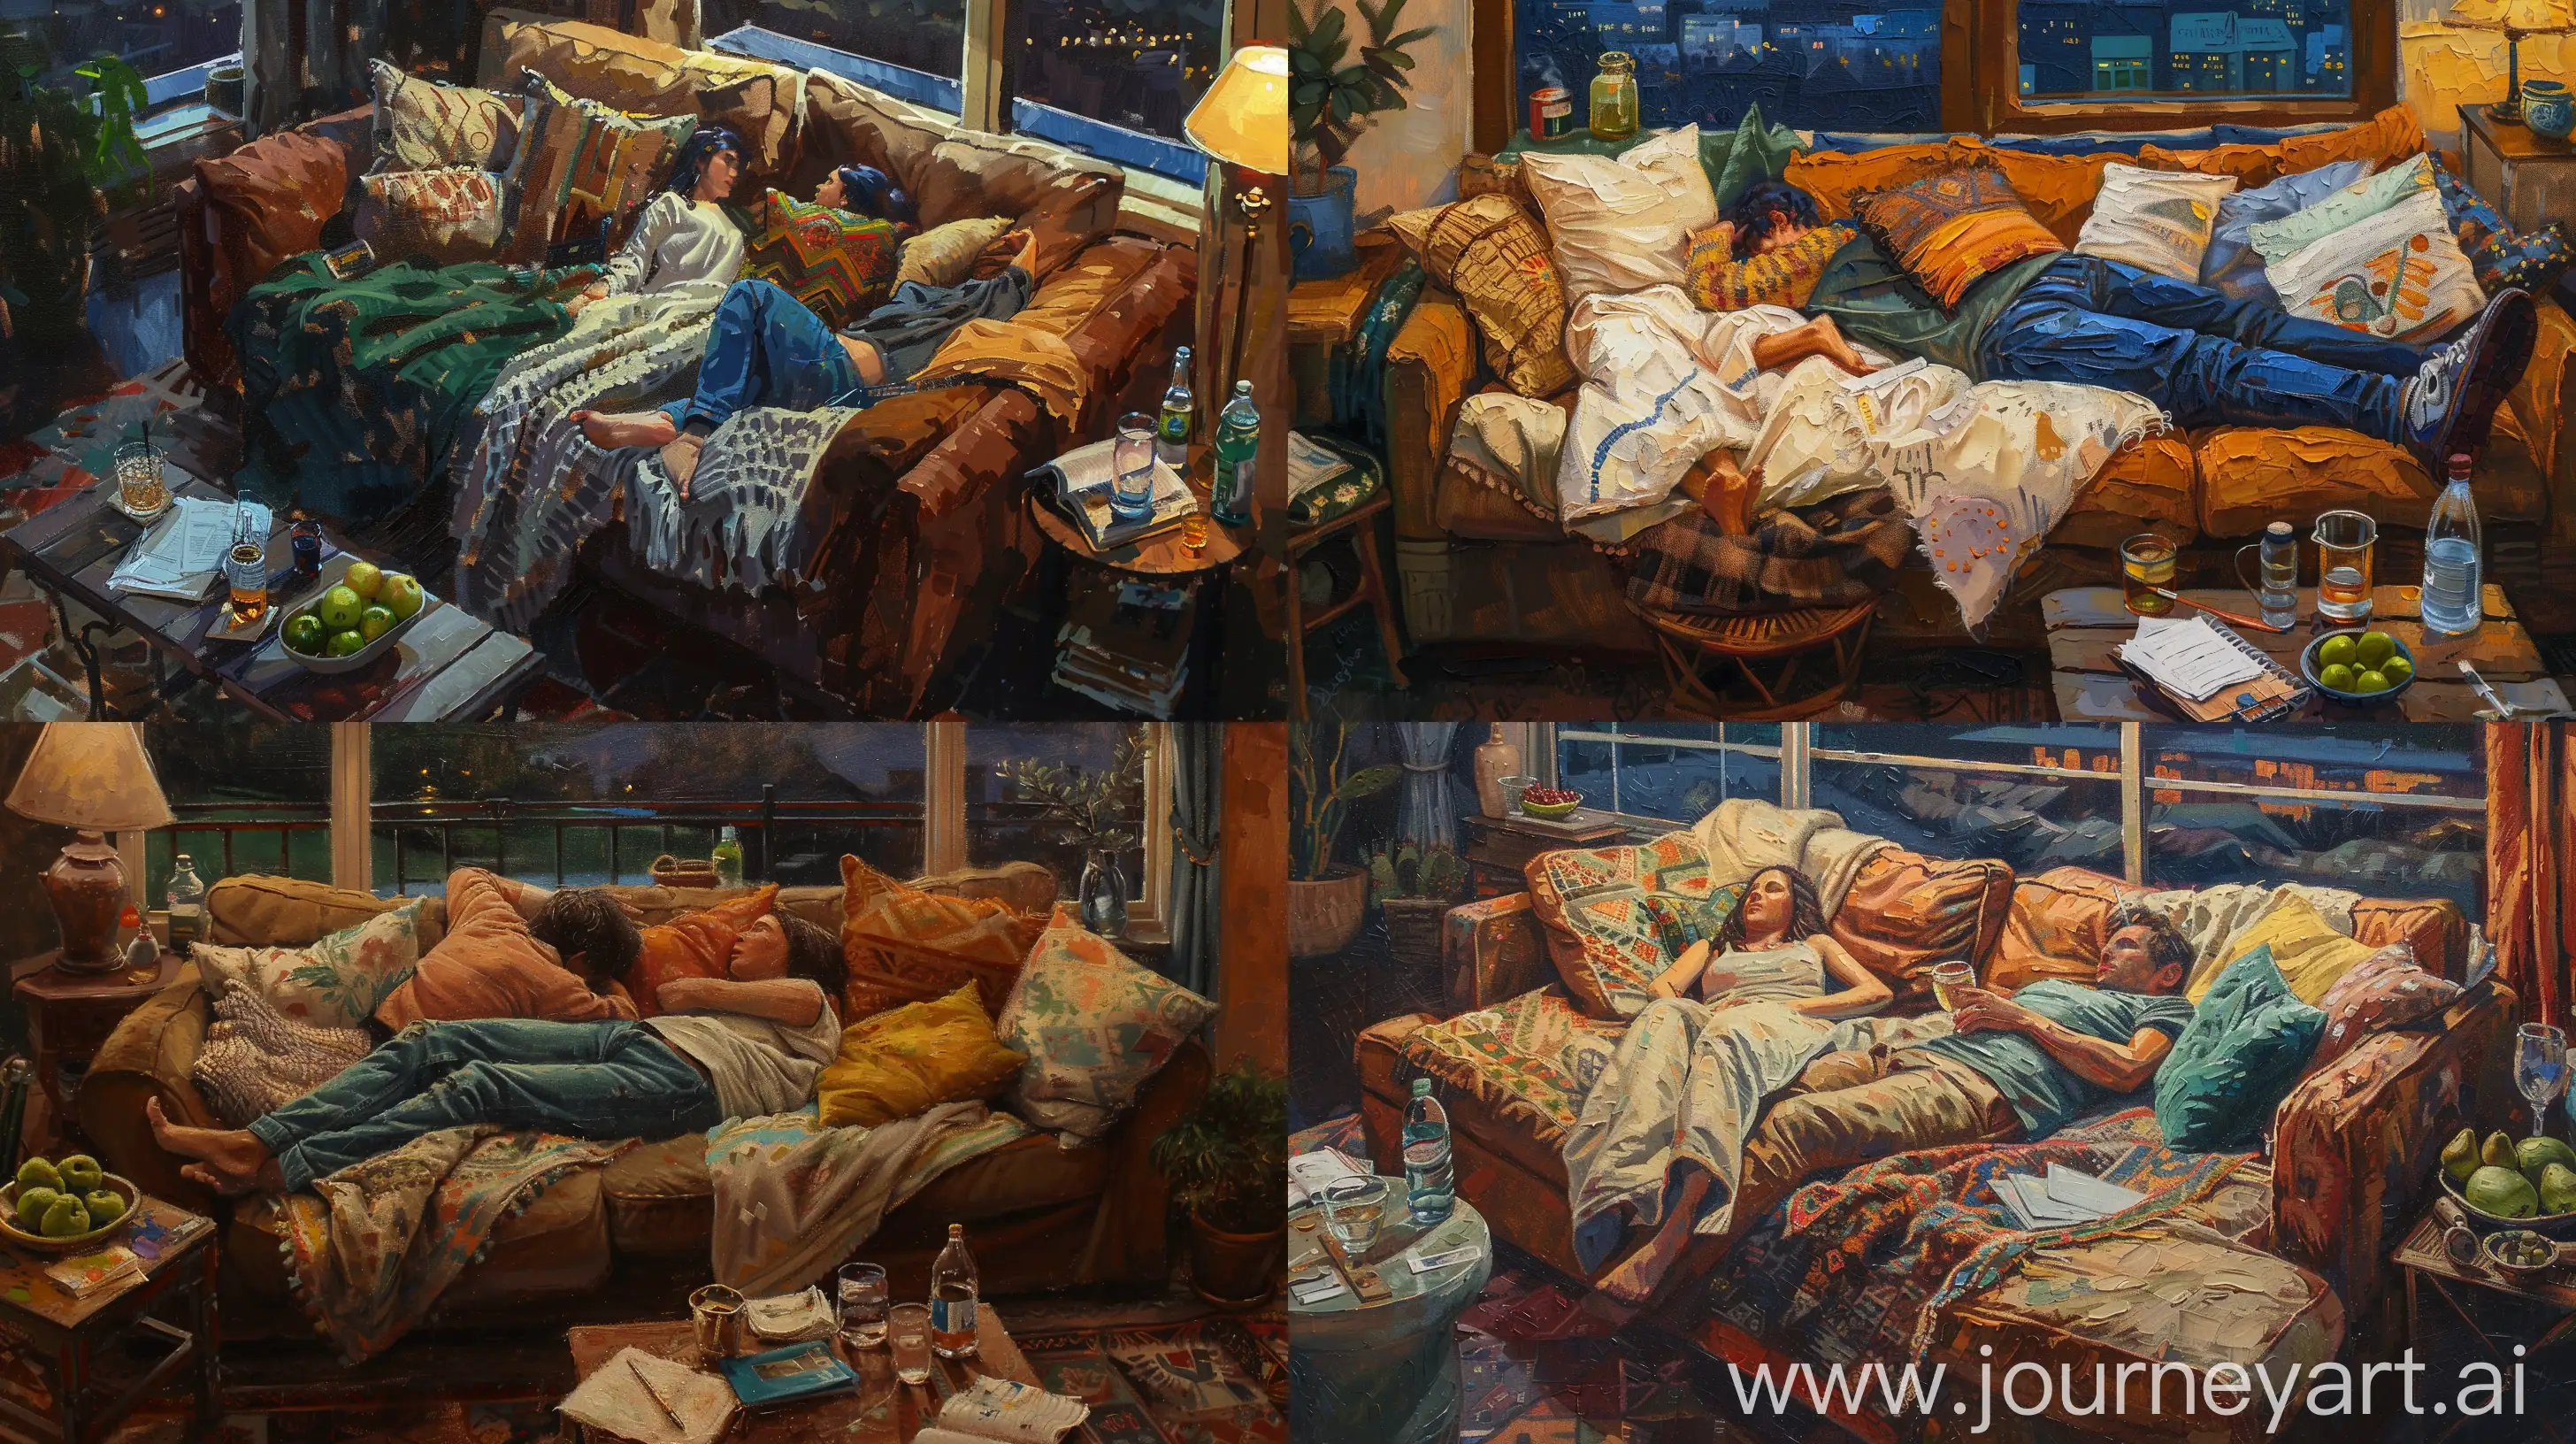 Cozy-Nighttime-Relaxation-Two-Persons-Lying-on-Couch-in-Textured-Oil-Painting